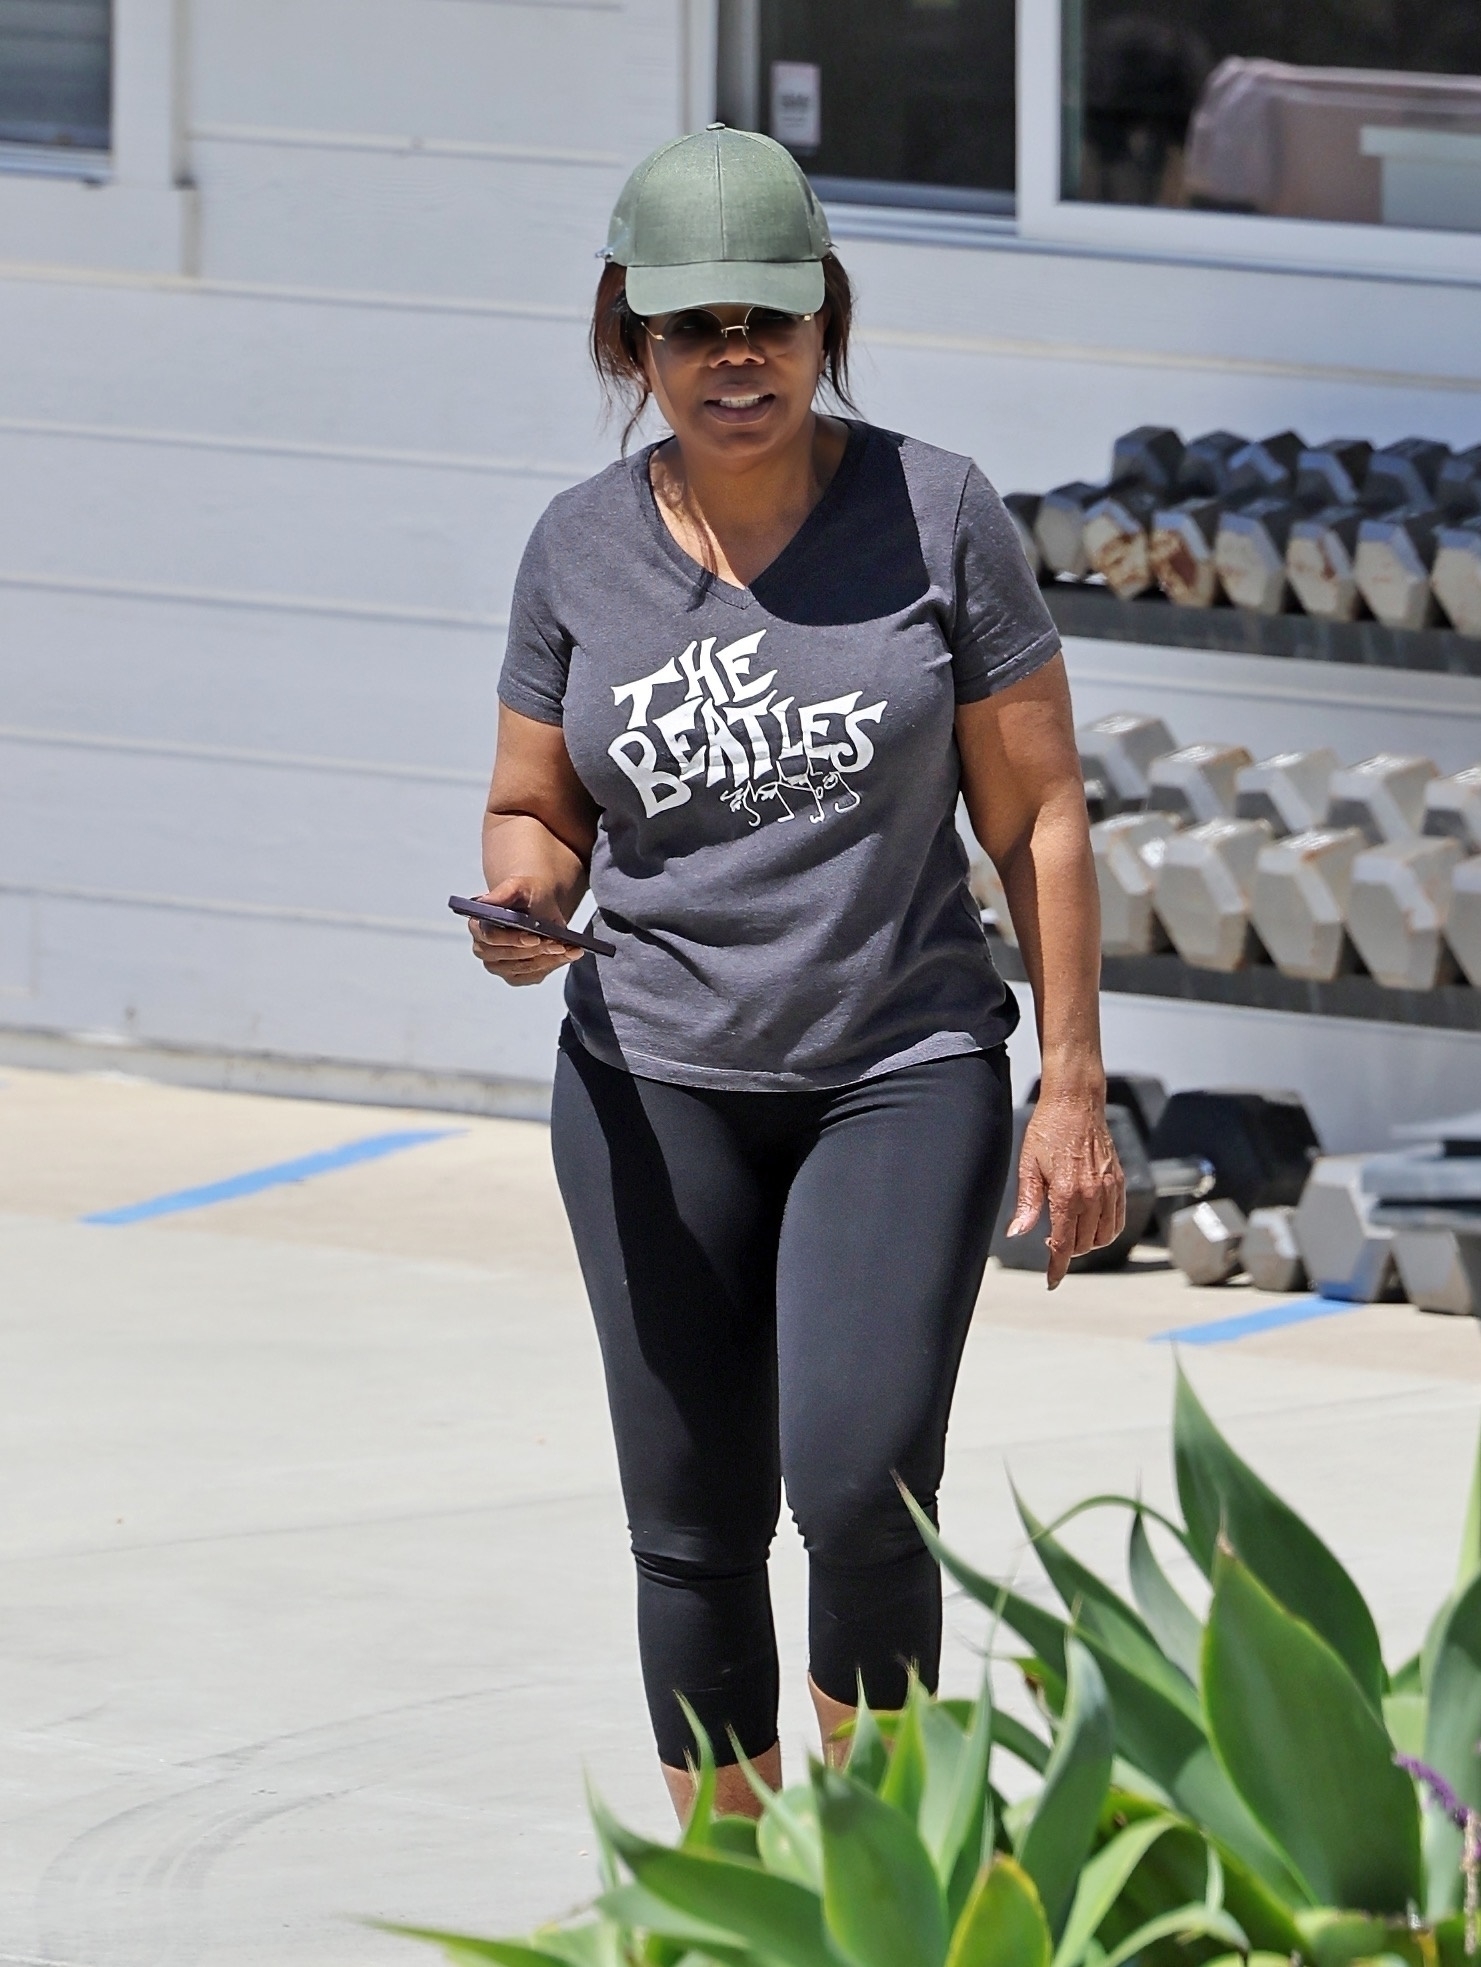 Oprah Winfrey has wowed fans, revealing the lengths she went to in order to lose weight